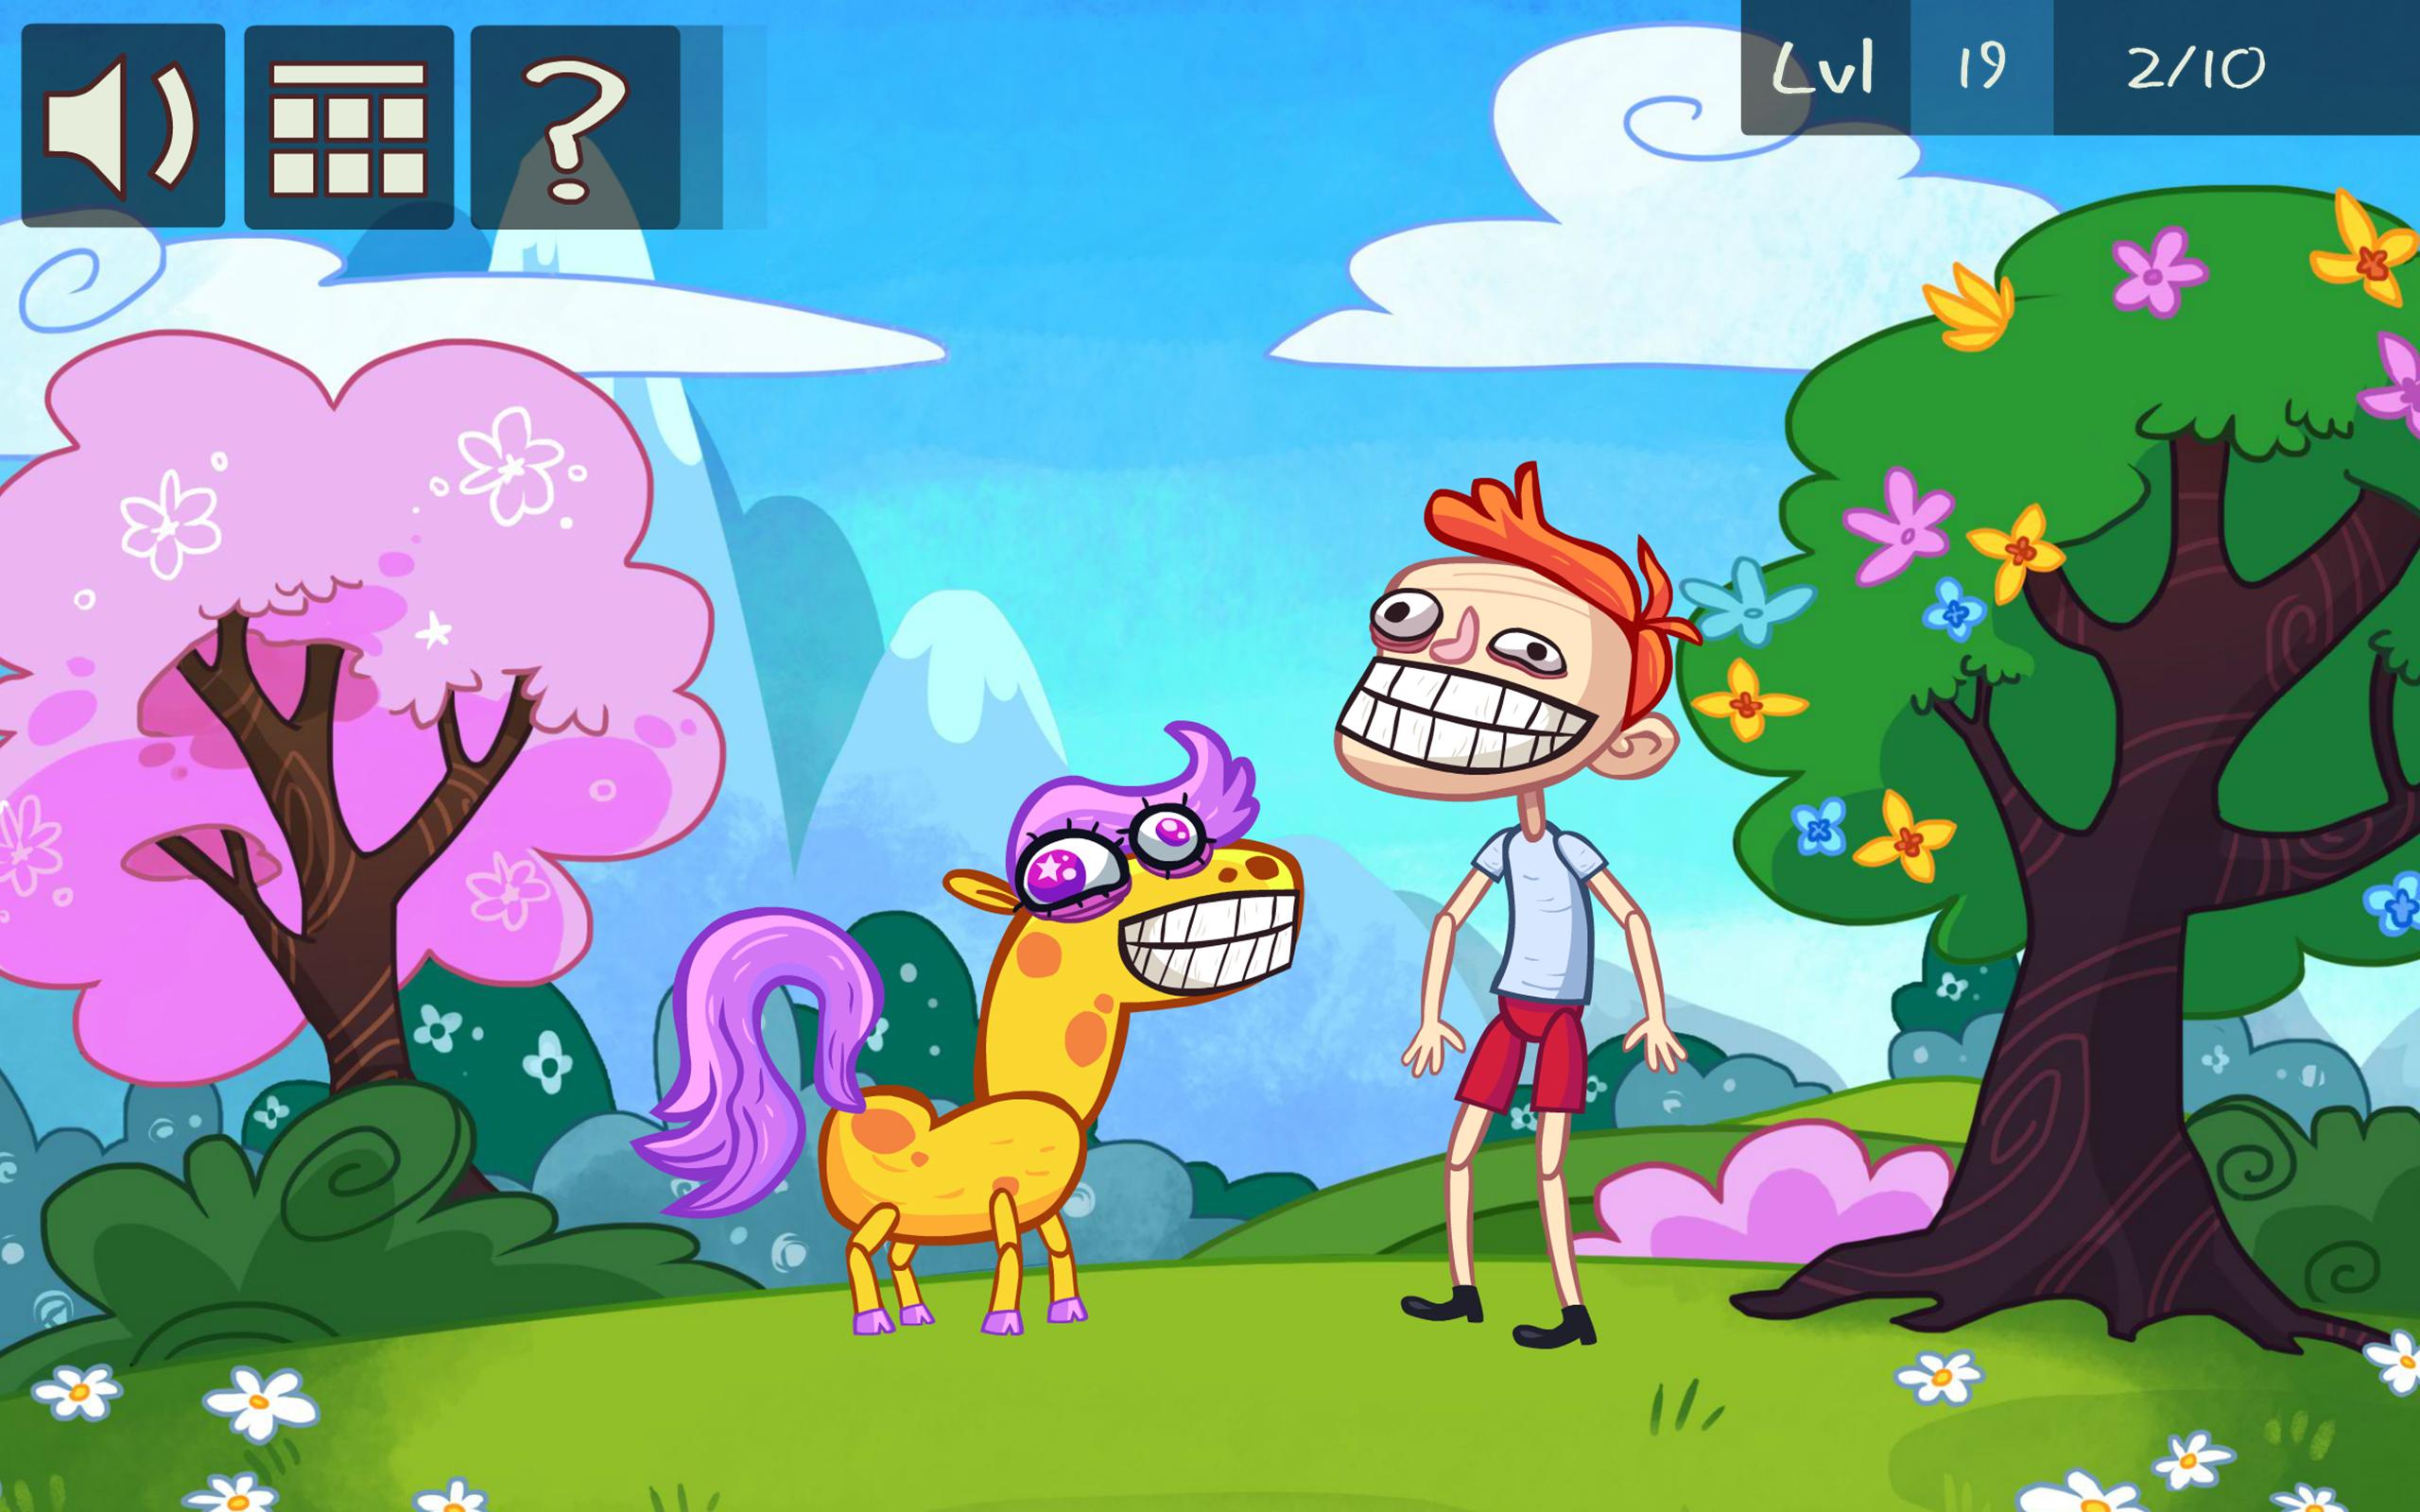 Troll Face Quest Video Games - Microsoft Apps